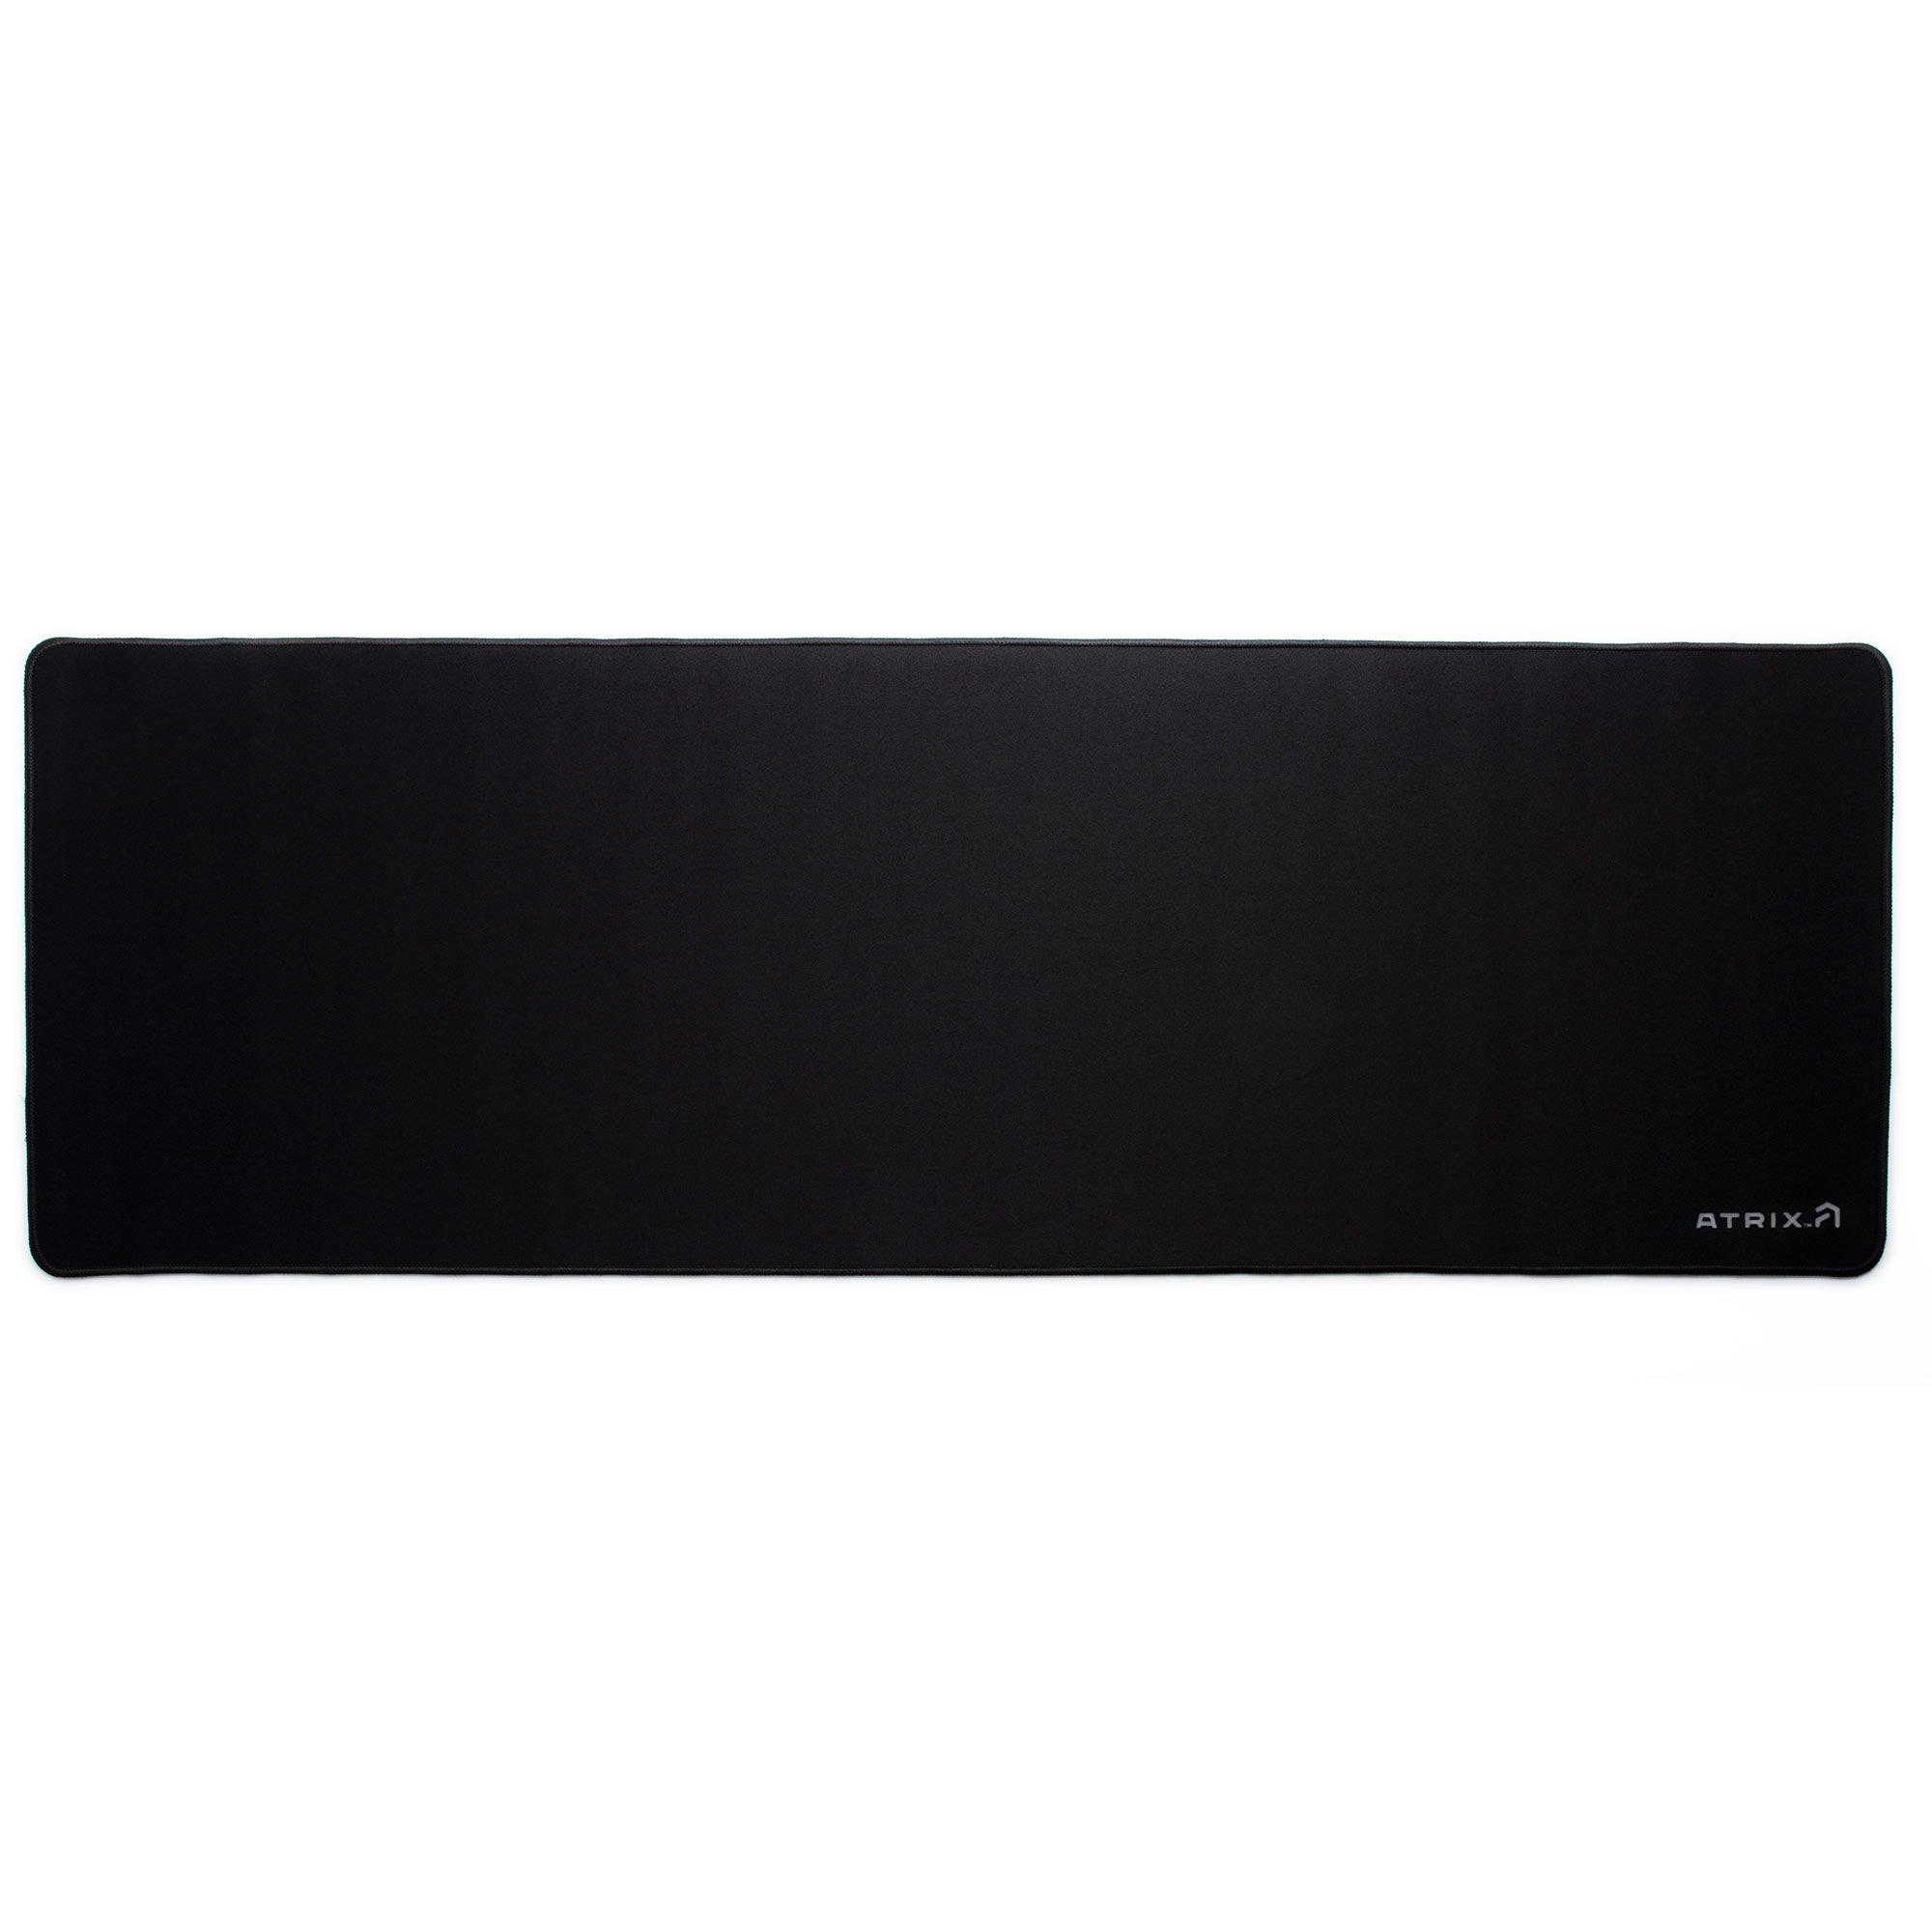   Basics Square Mouse Pad, Cloth with Rubberized